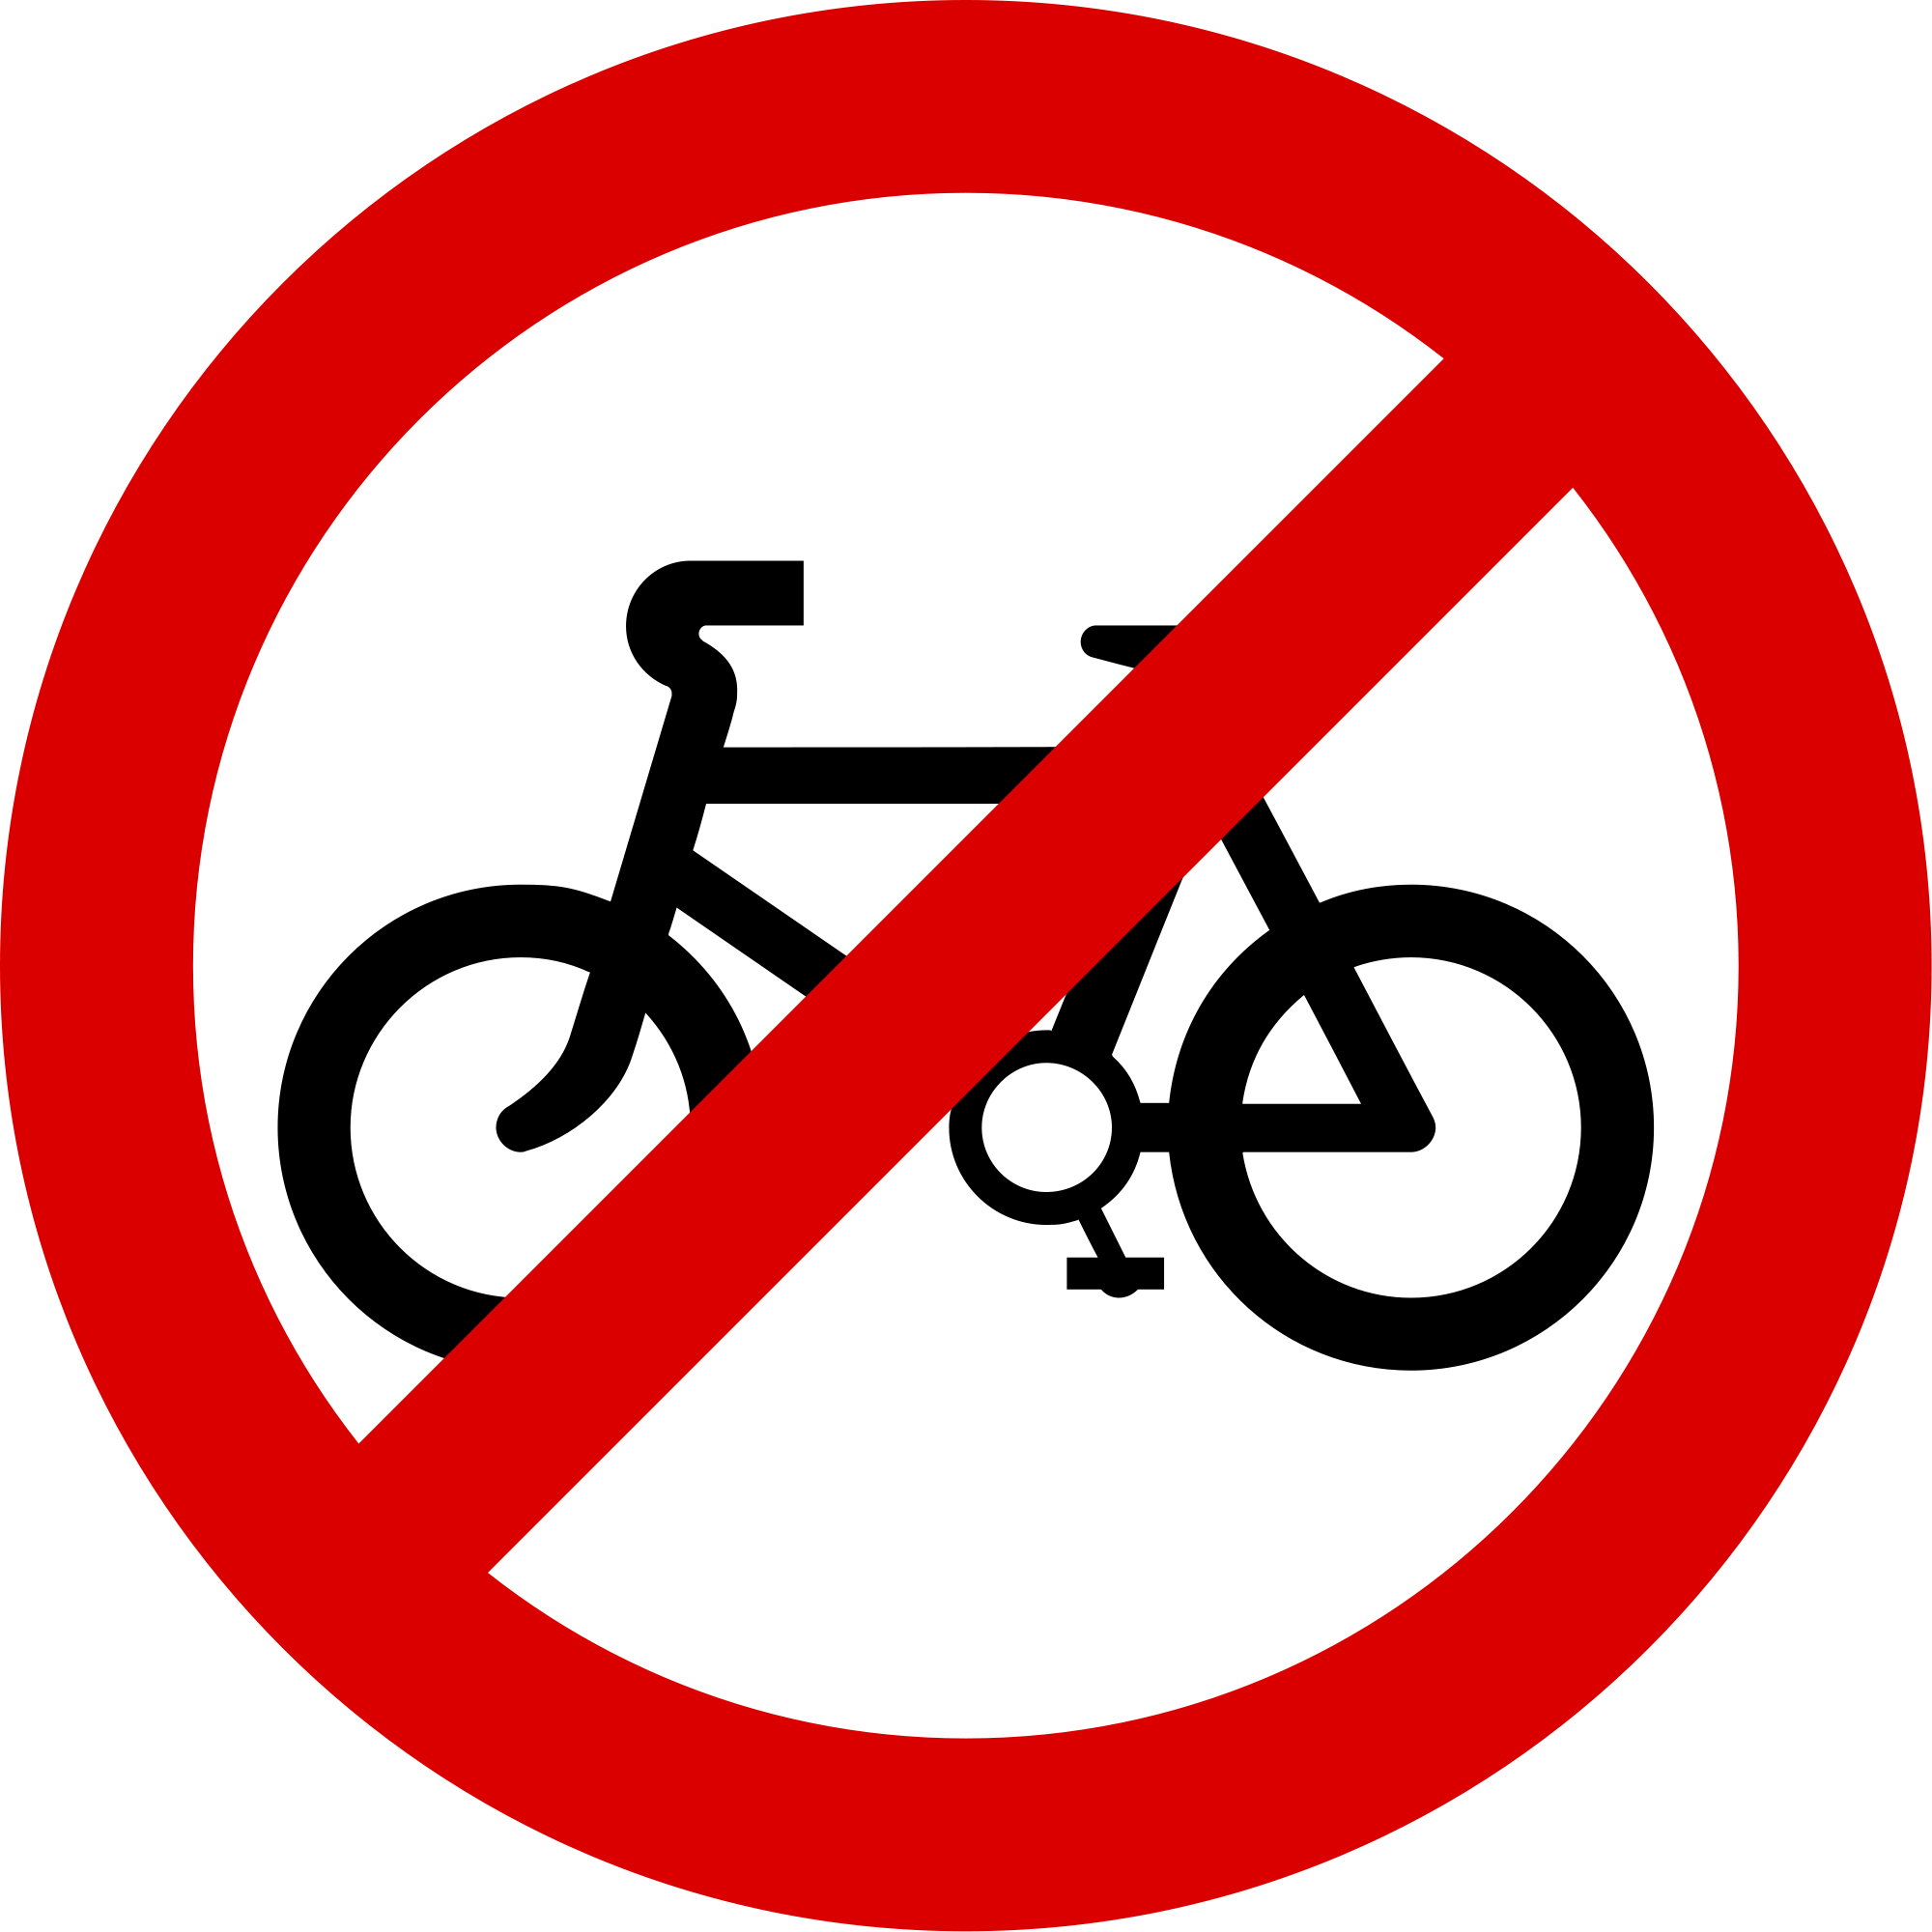 File:Singapore Road Signs - Regulatory Sign - No Cycles.svg ...